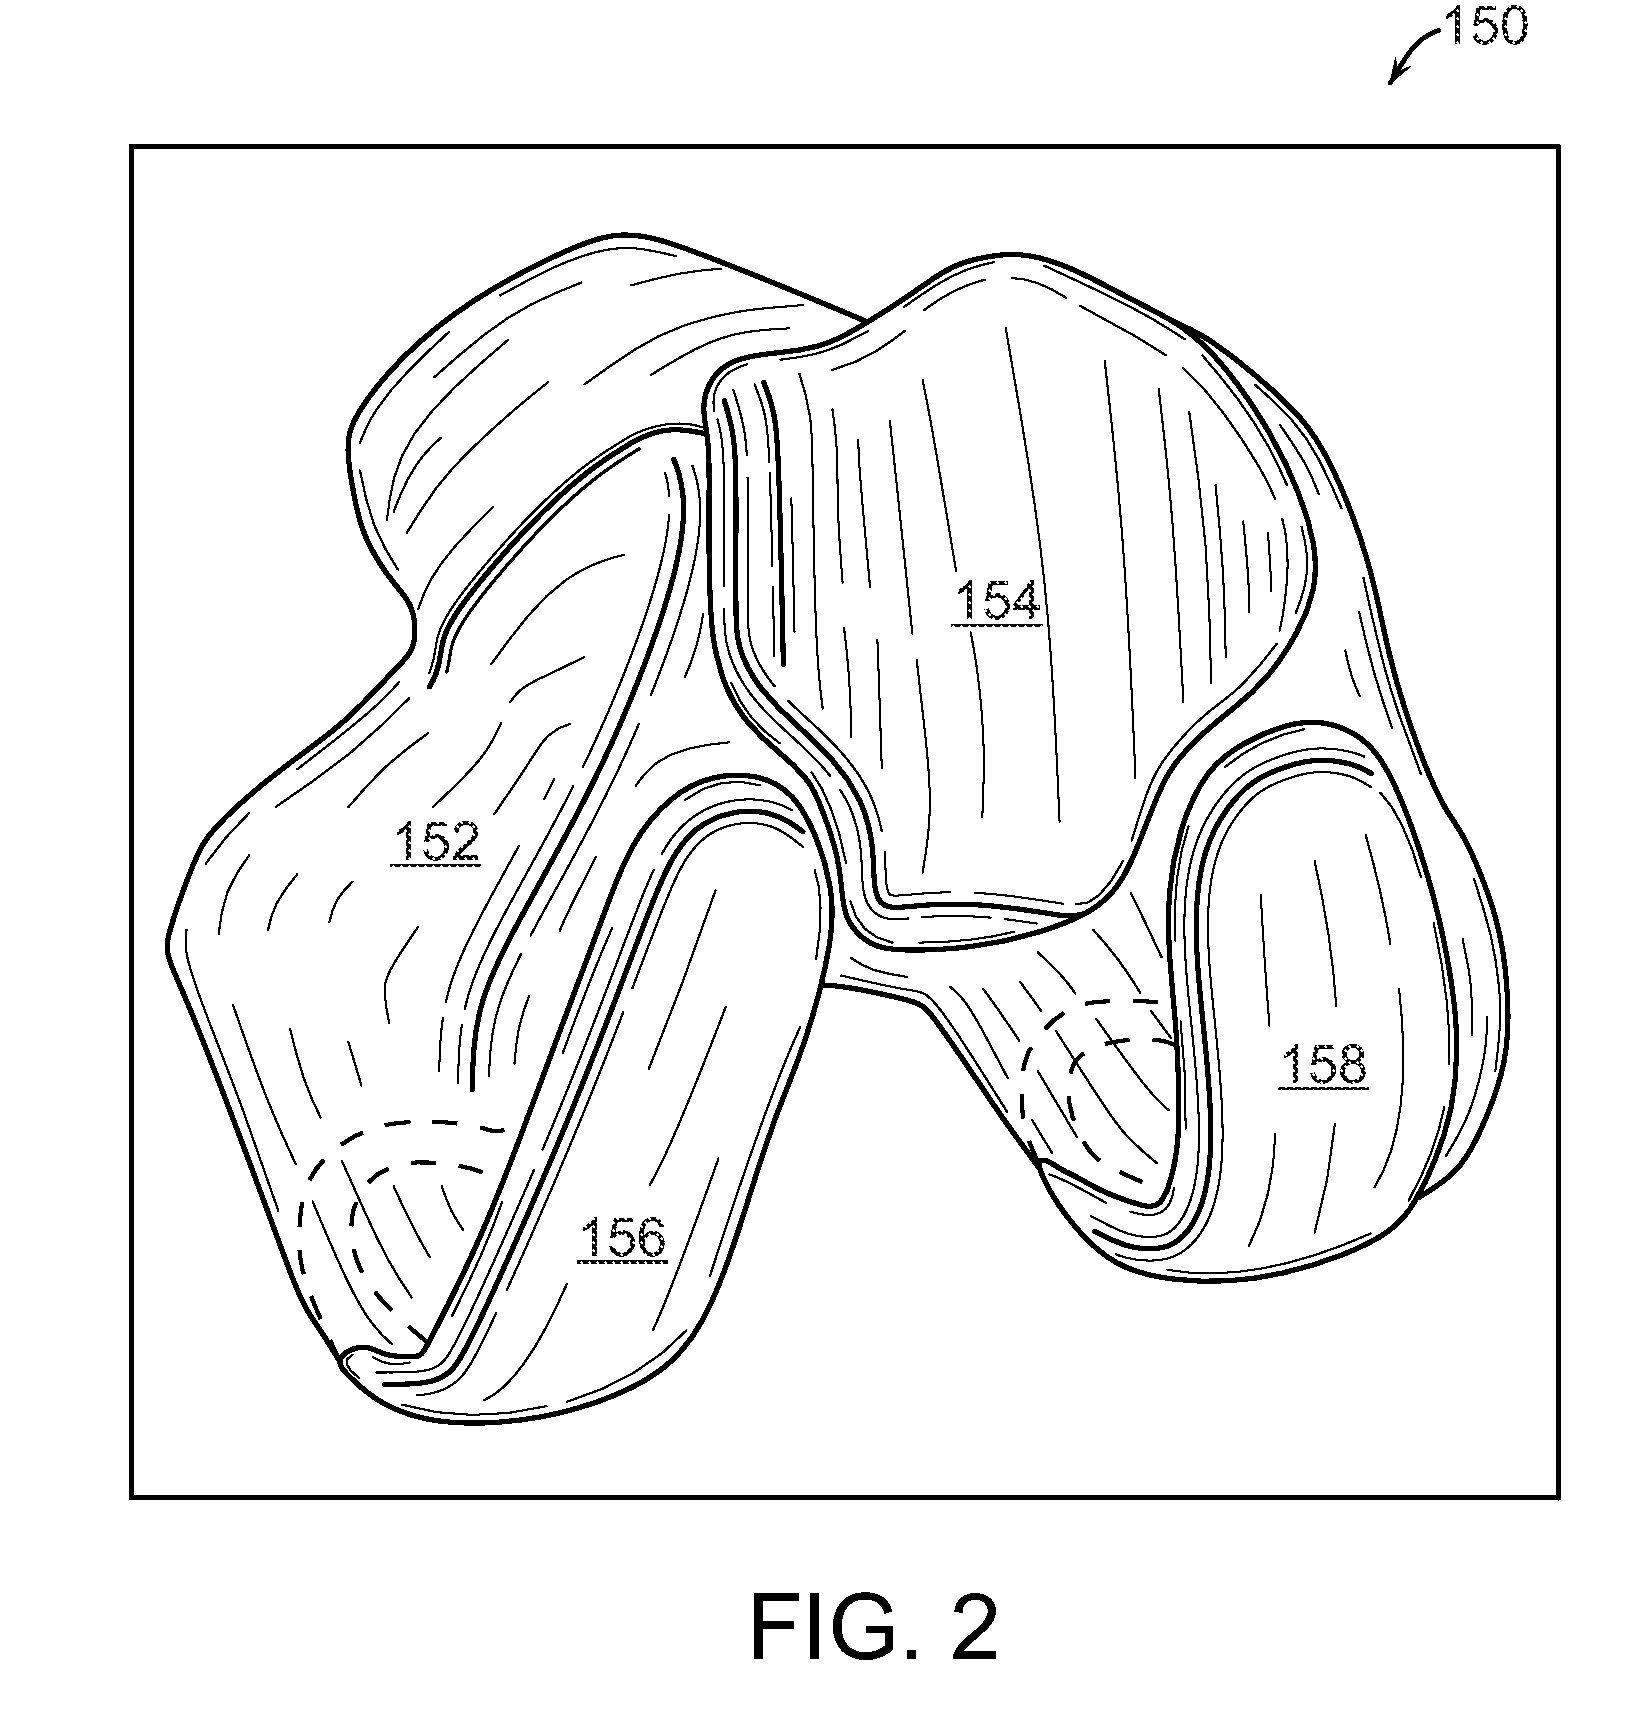 Implant planning for multiple implant components using constraints